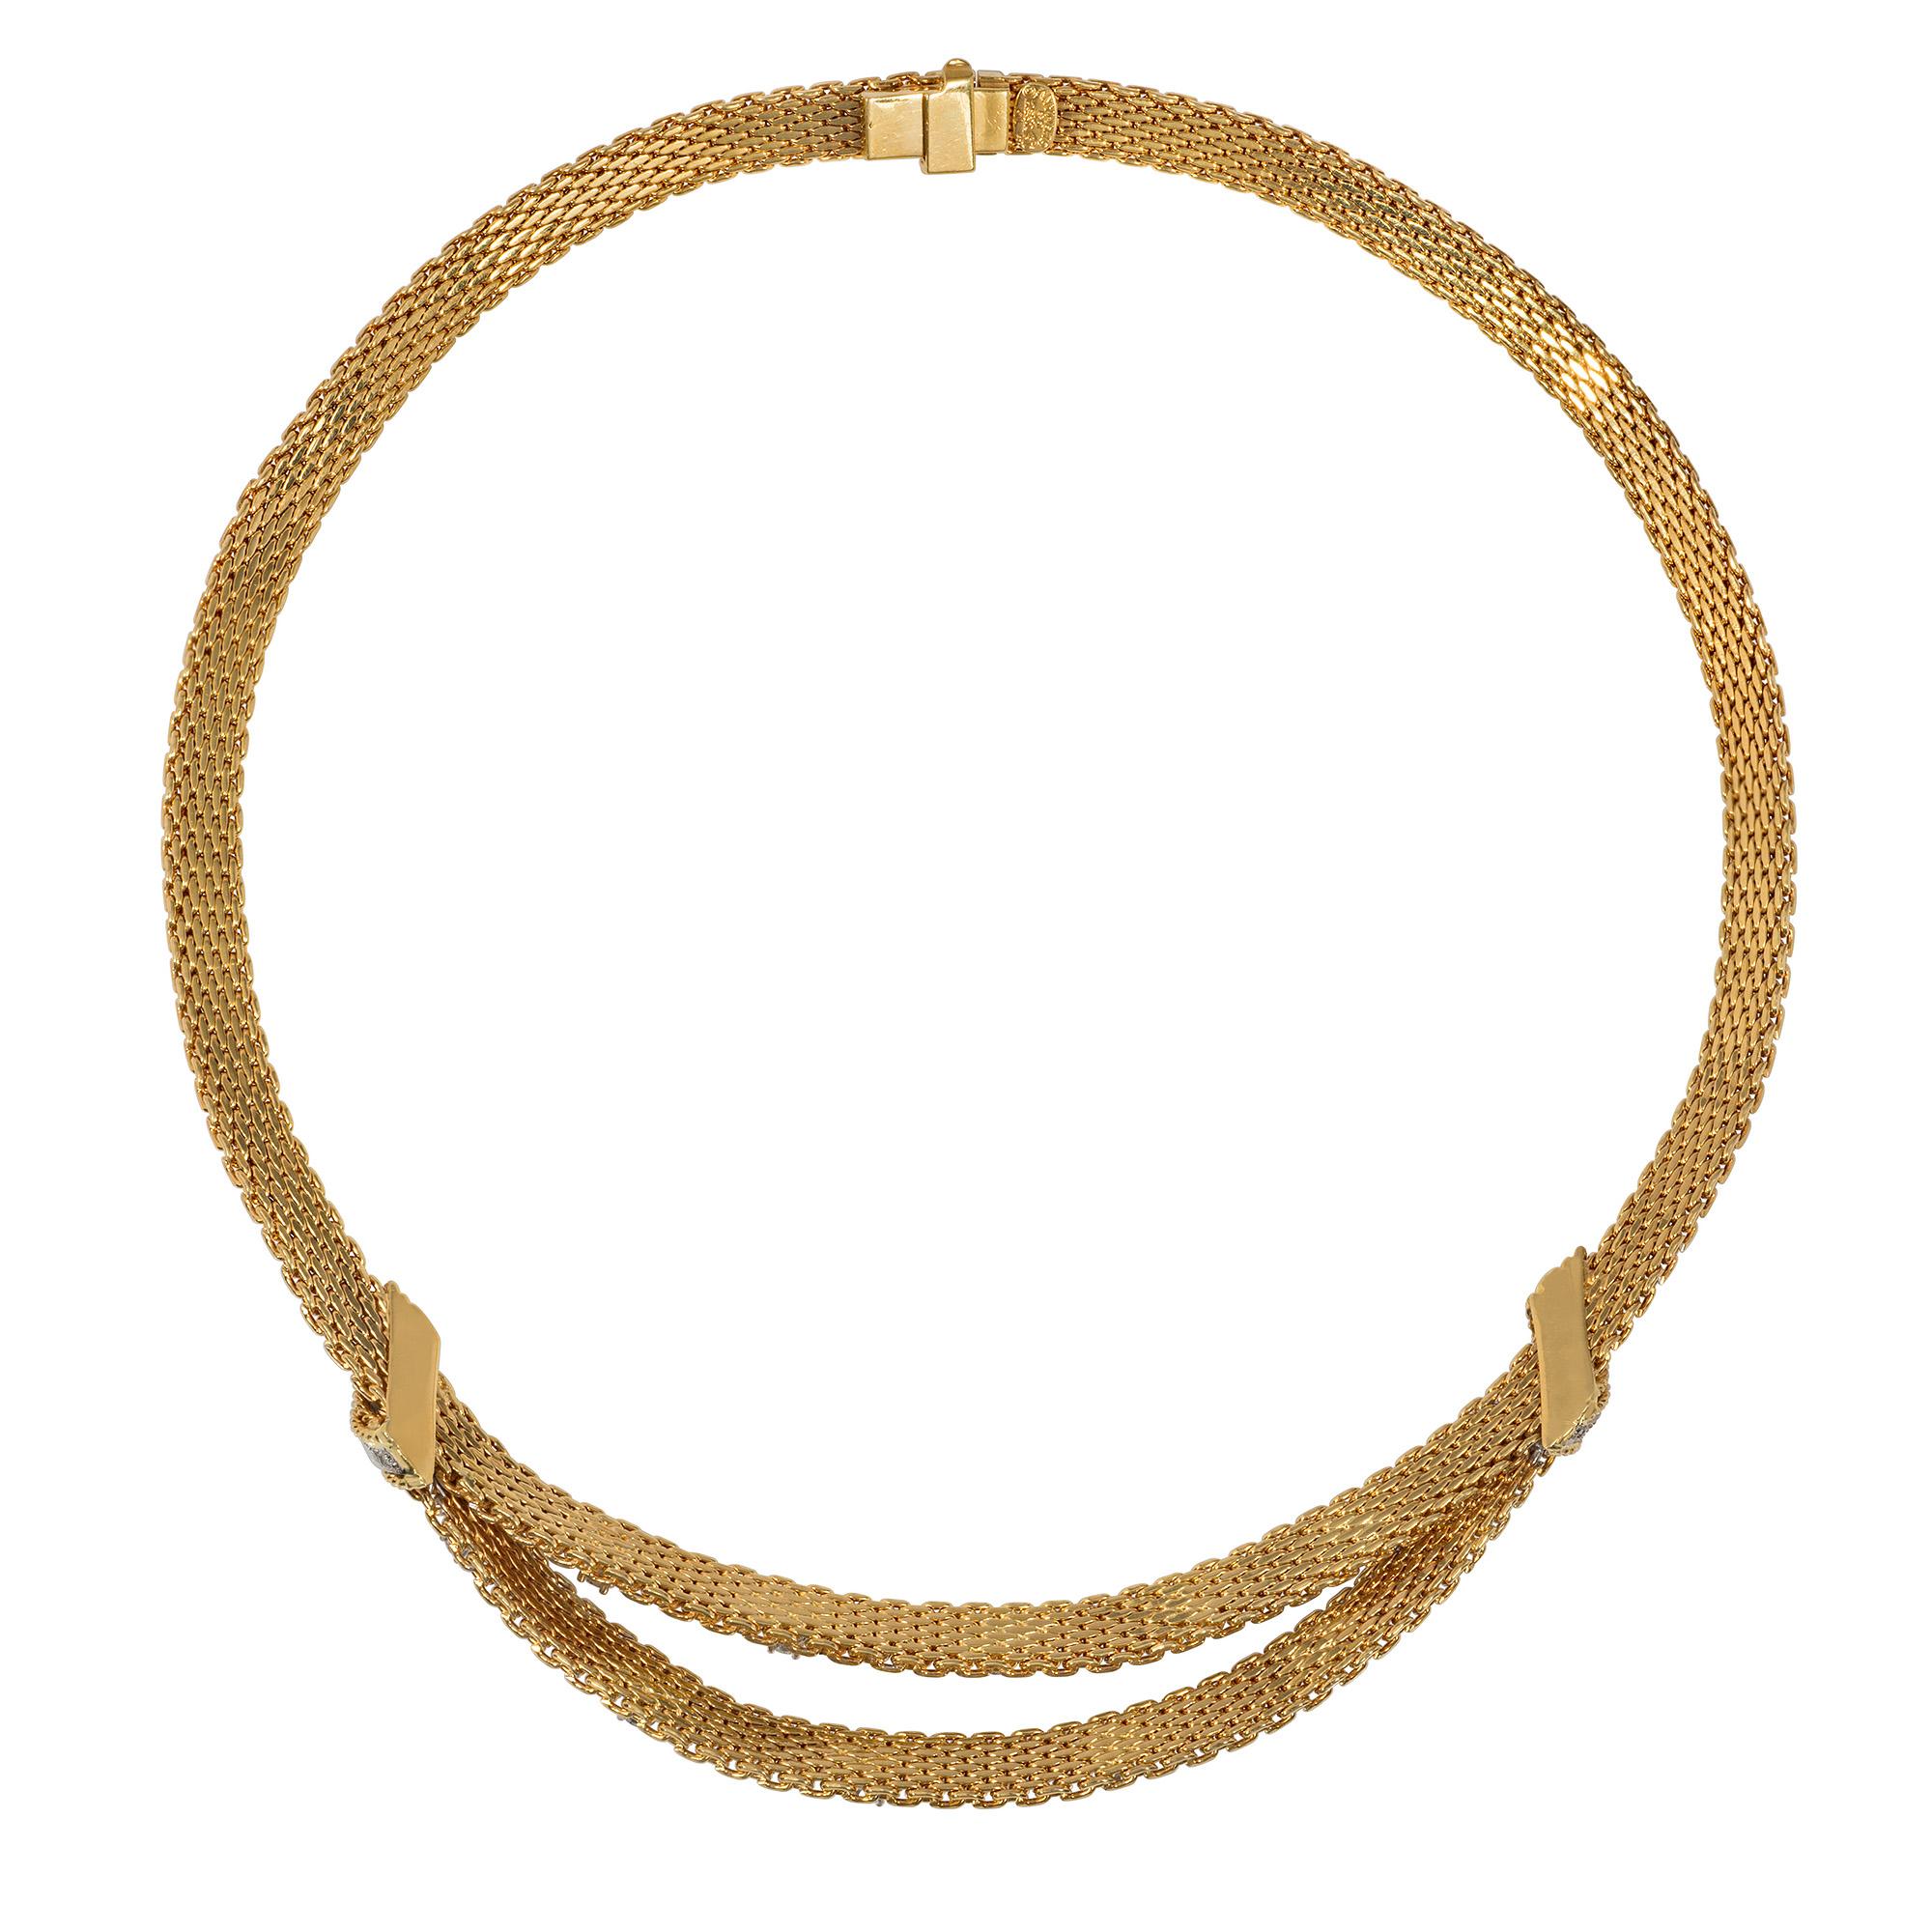 A mid-century woven gold and diamond swag necklace featuring a swagged center accented with claw-set diamonds and flanked by scrolled diamond ornaments with gold rope twist borders, in 18k.  Stamped Grosse, Germany, 1965.  Atw diamonds 1.18 cts.

*